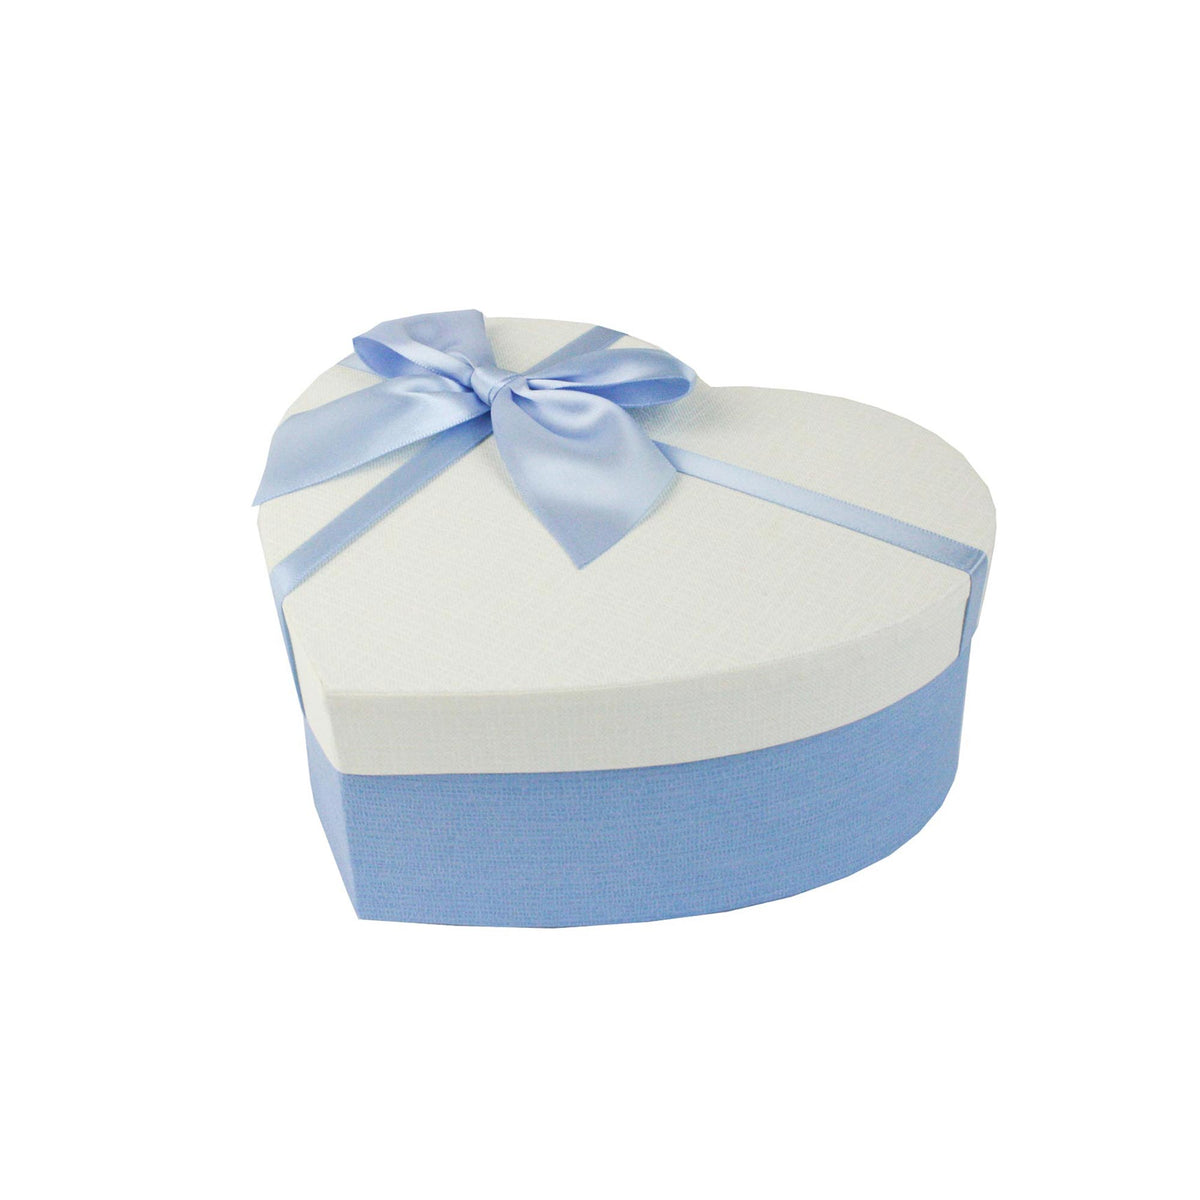 Single Blue/White Gift Box with Blue Satin Ribbon (Sizes Available)